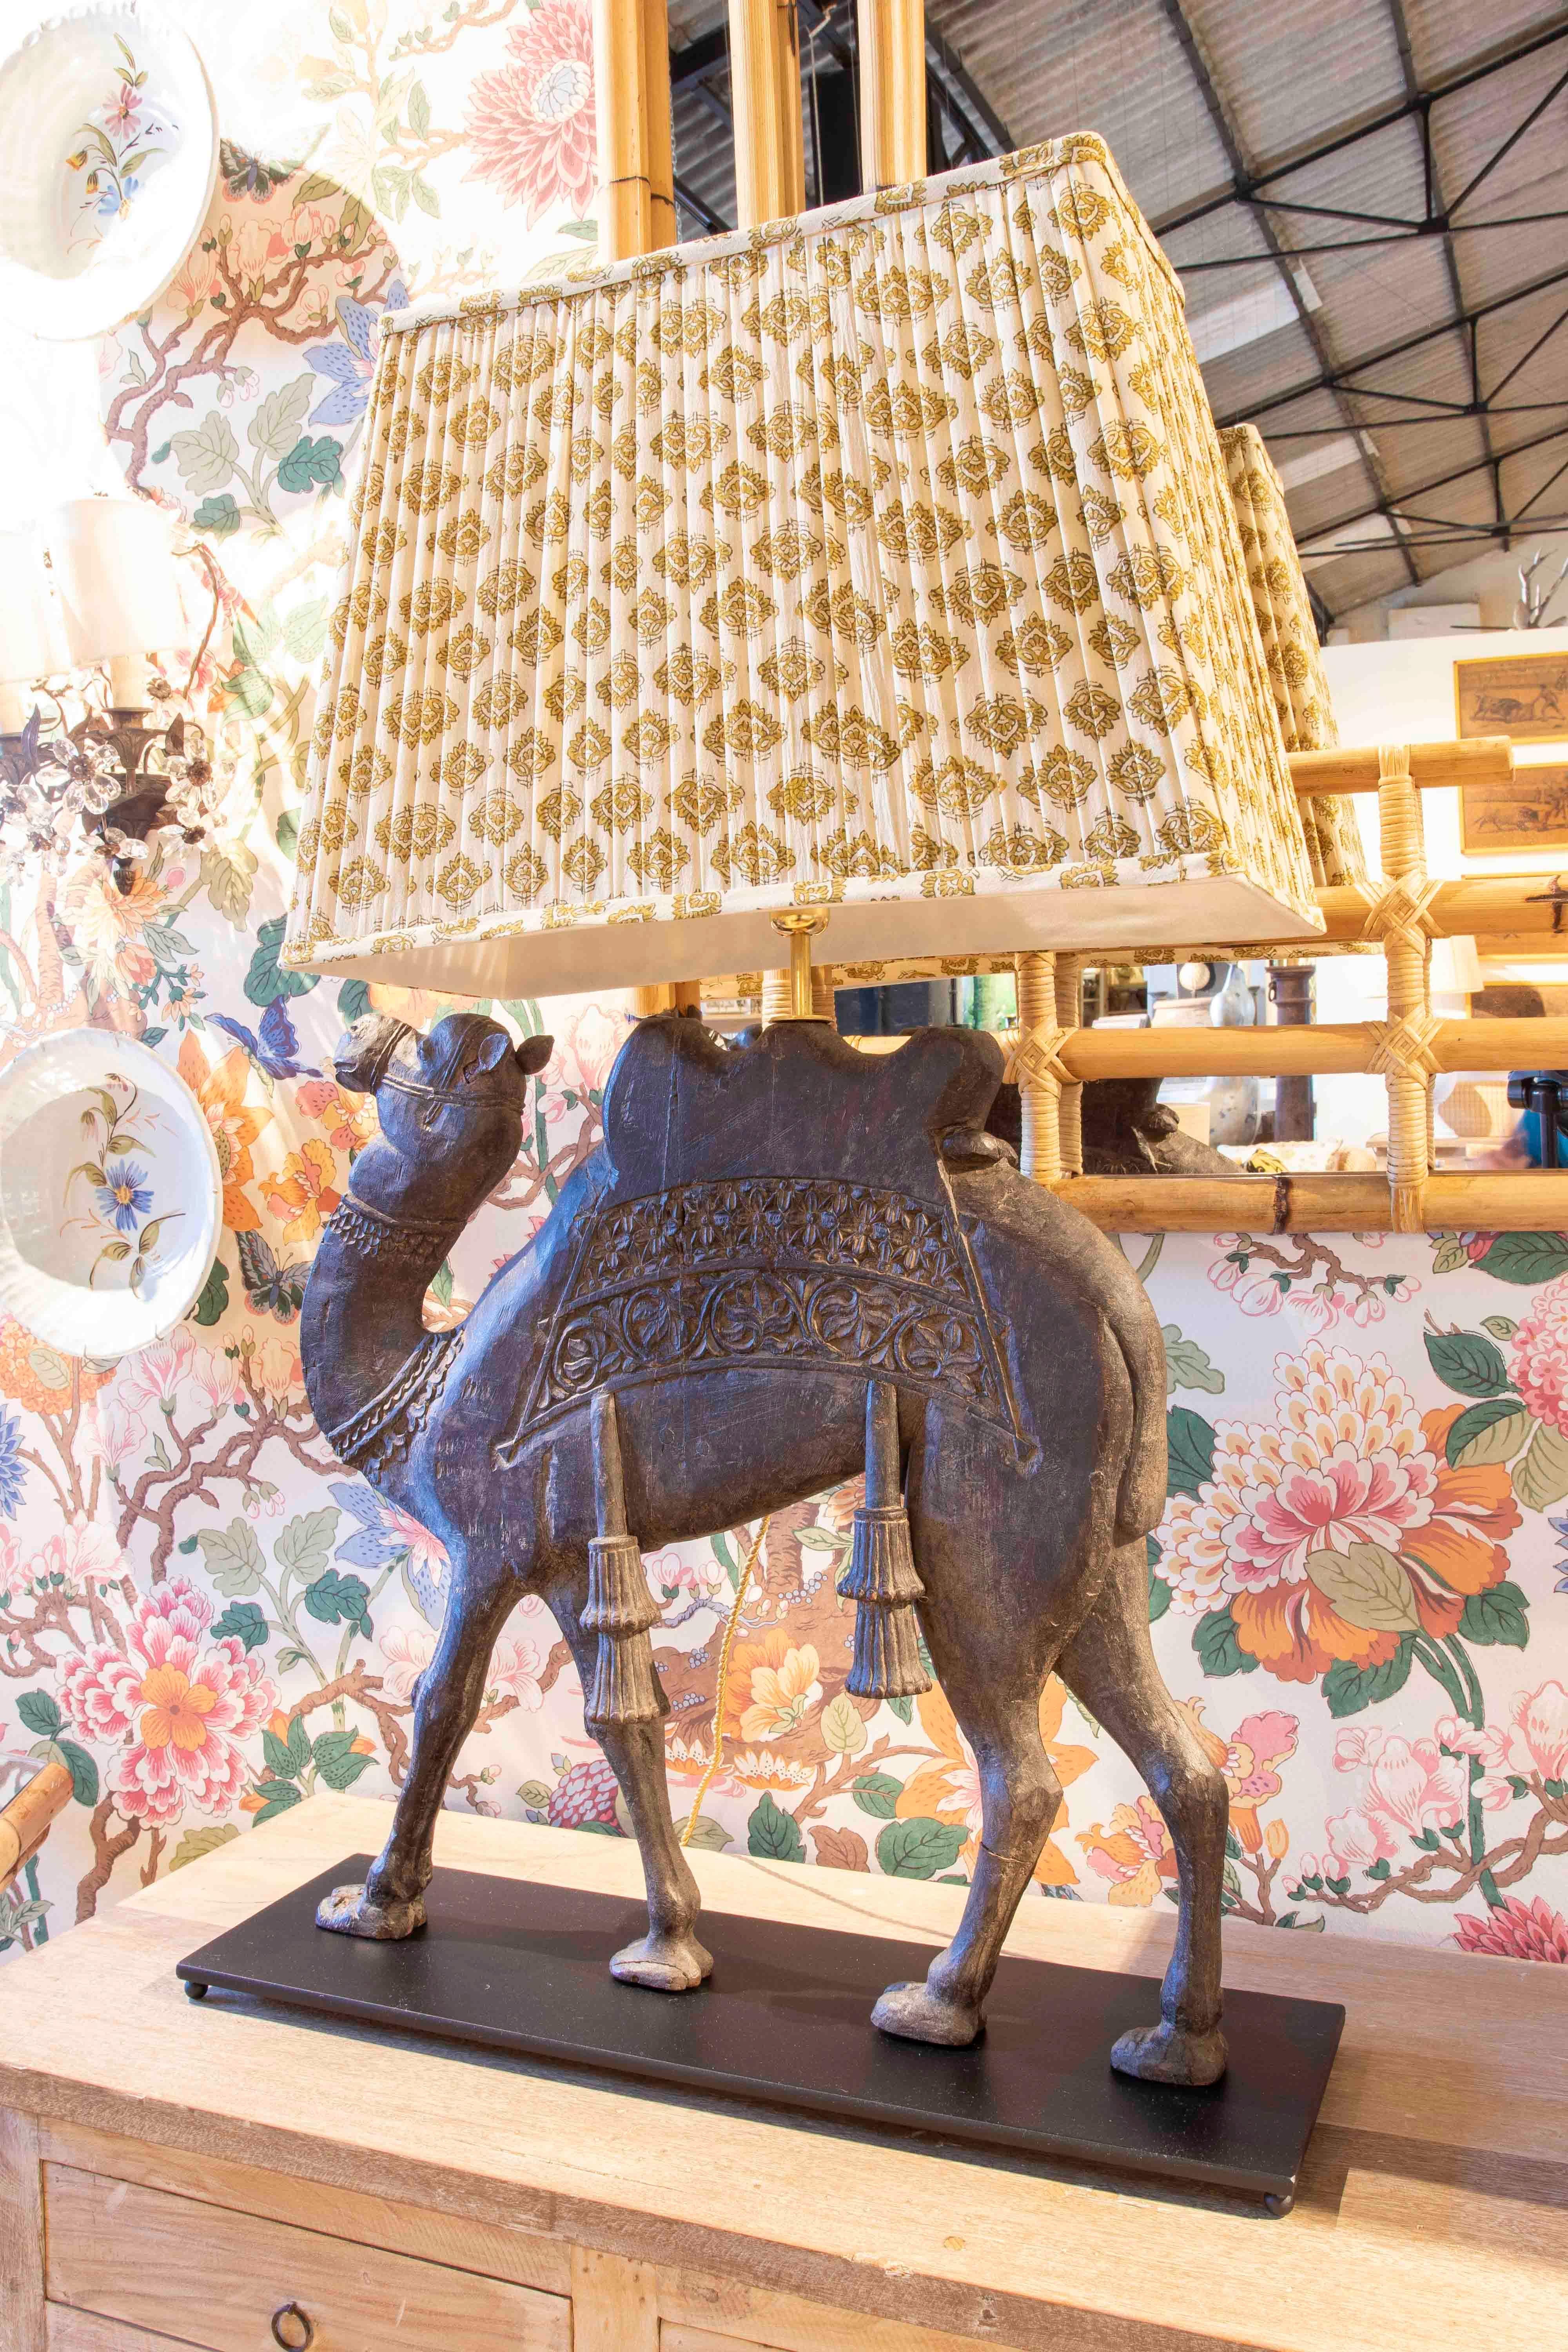 Asian Pair of Lamps with Carved Wooden Camel Foot on Both Sides